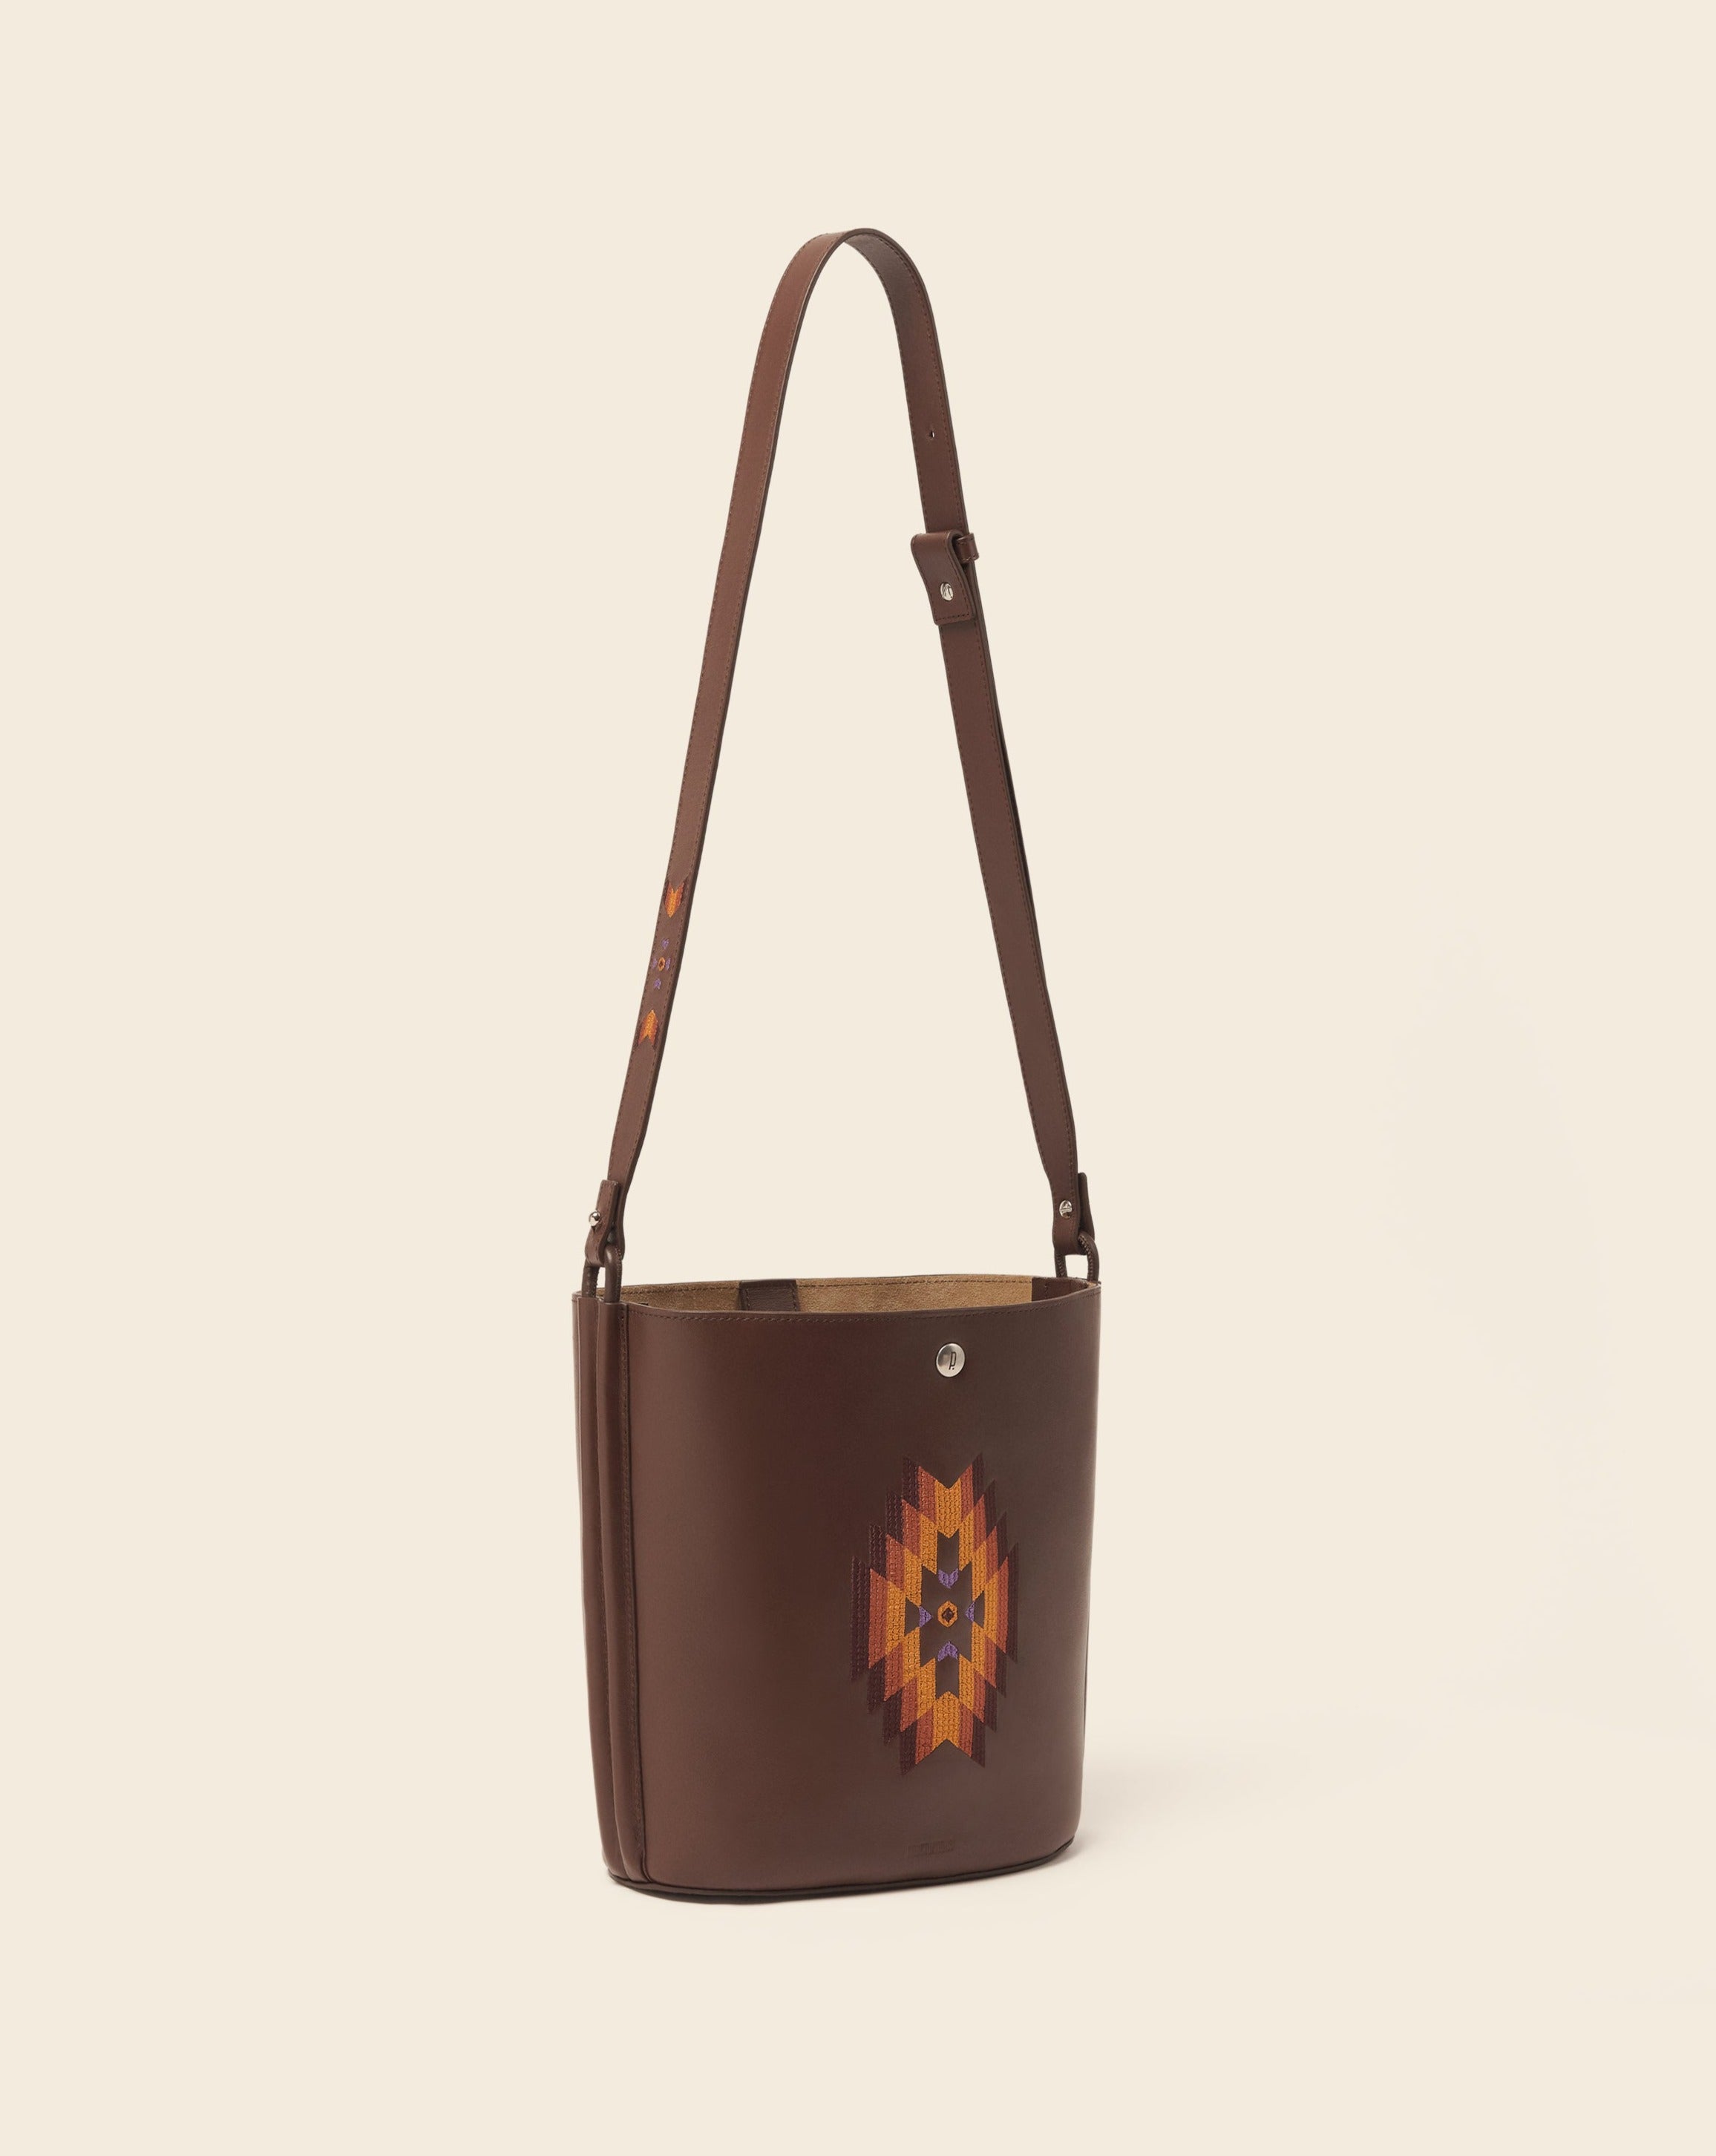 IOWA - Leather bucket bag - Brown leather & multicolored embroidery